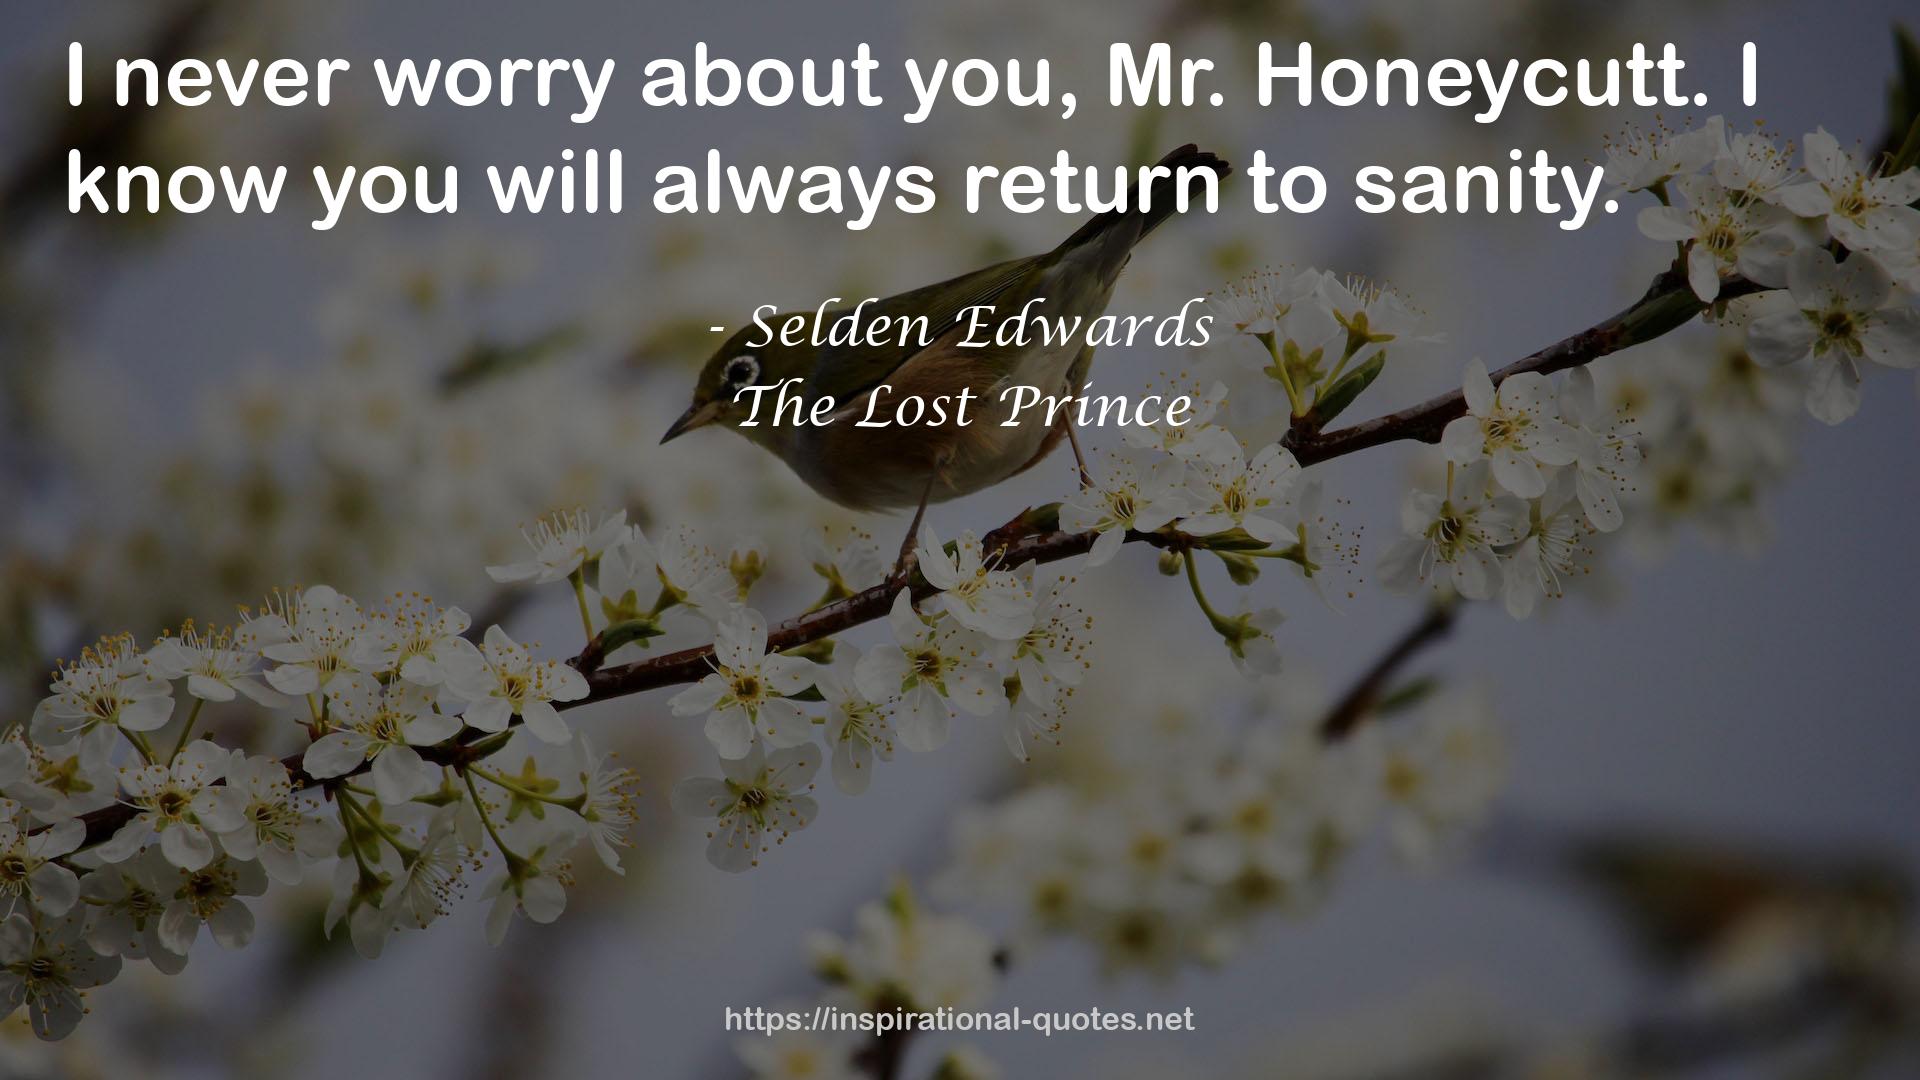 The Lost Prince QUOTES